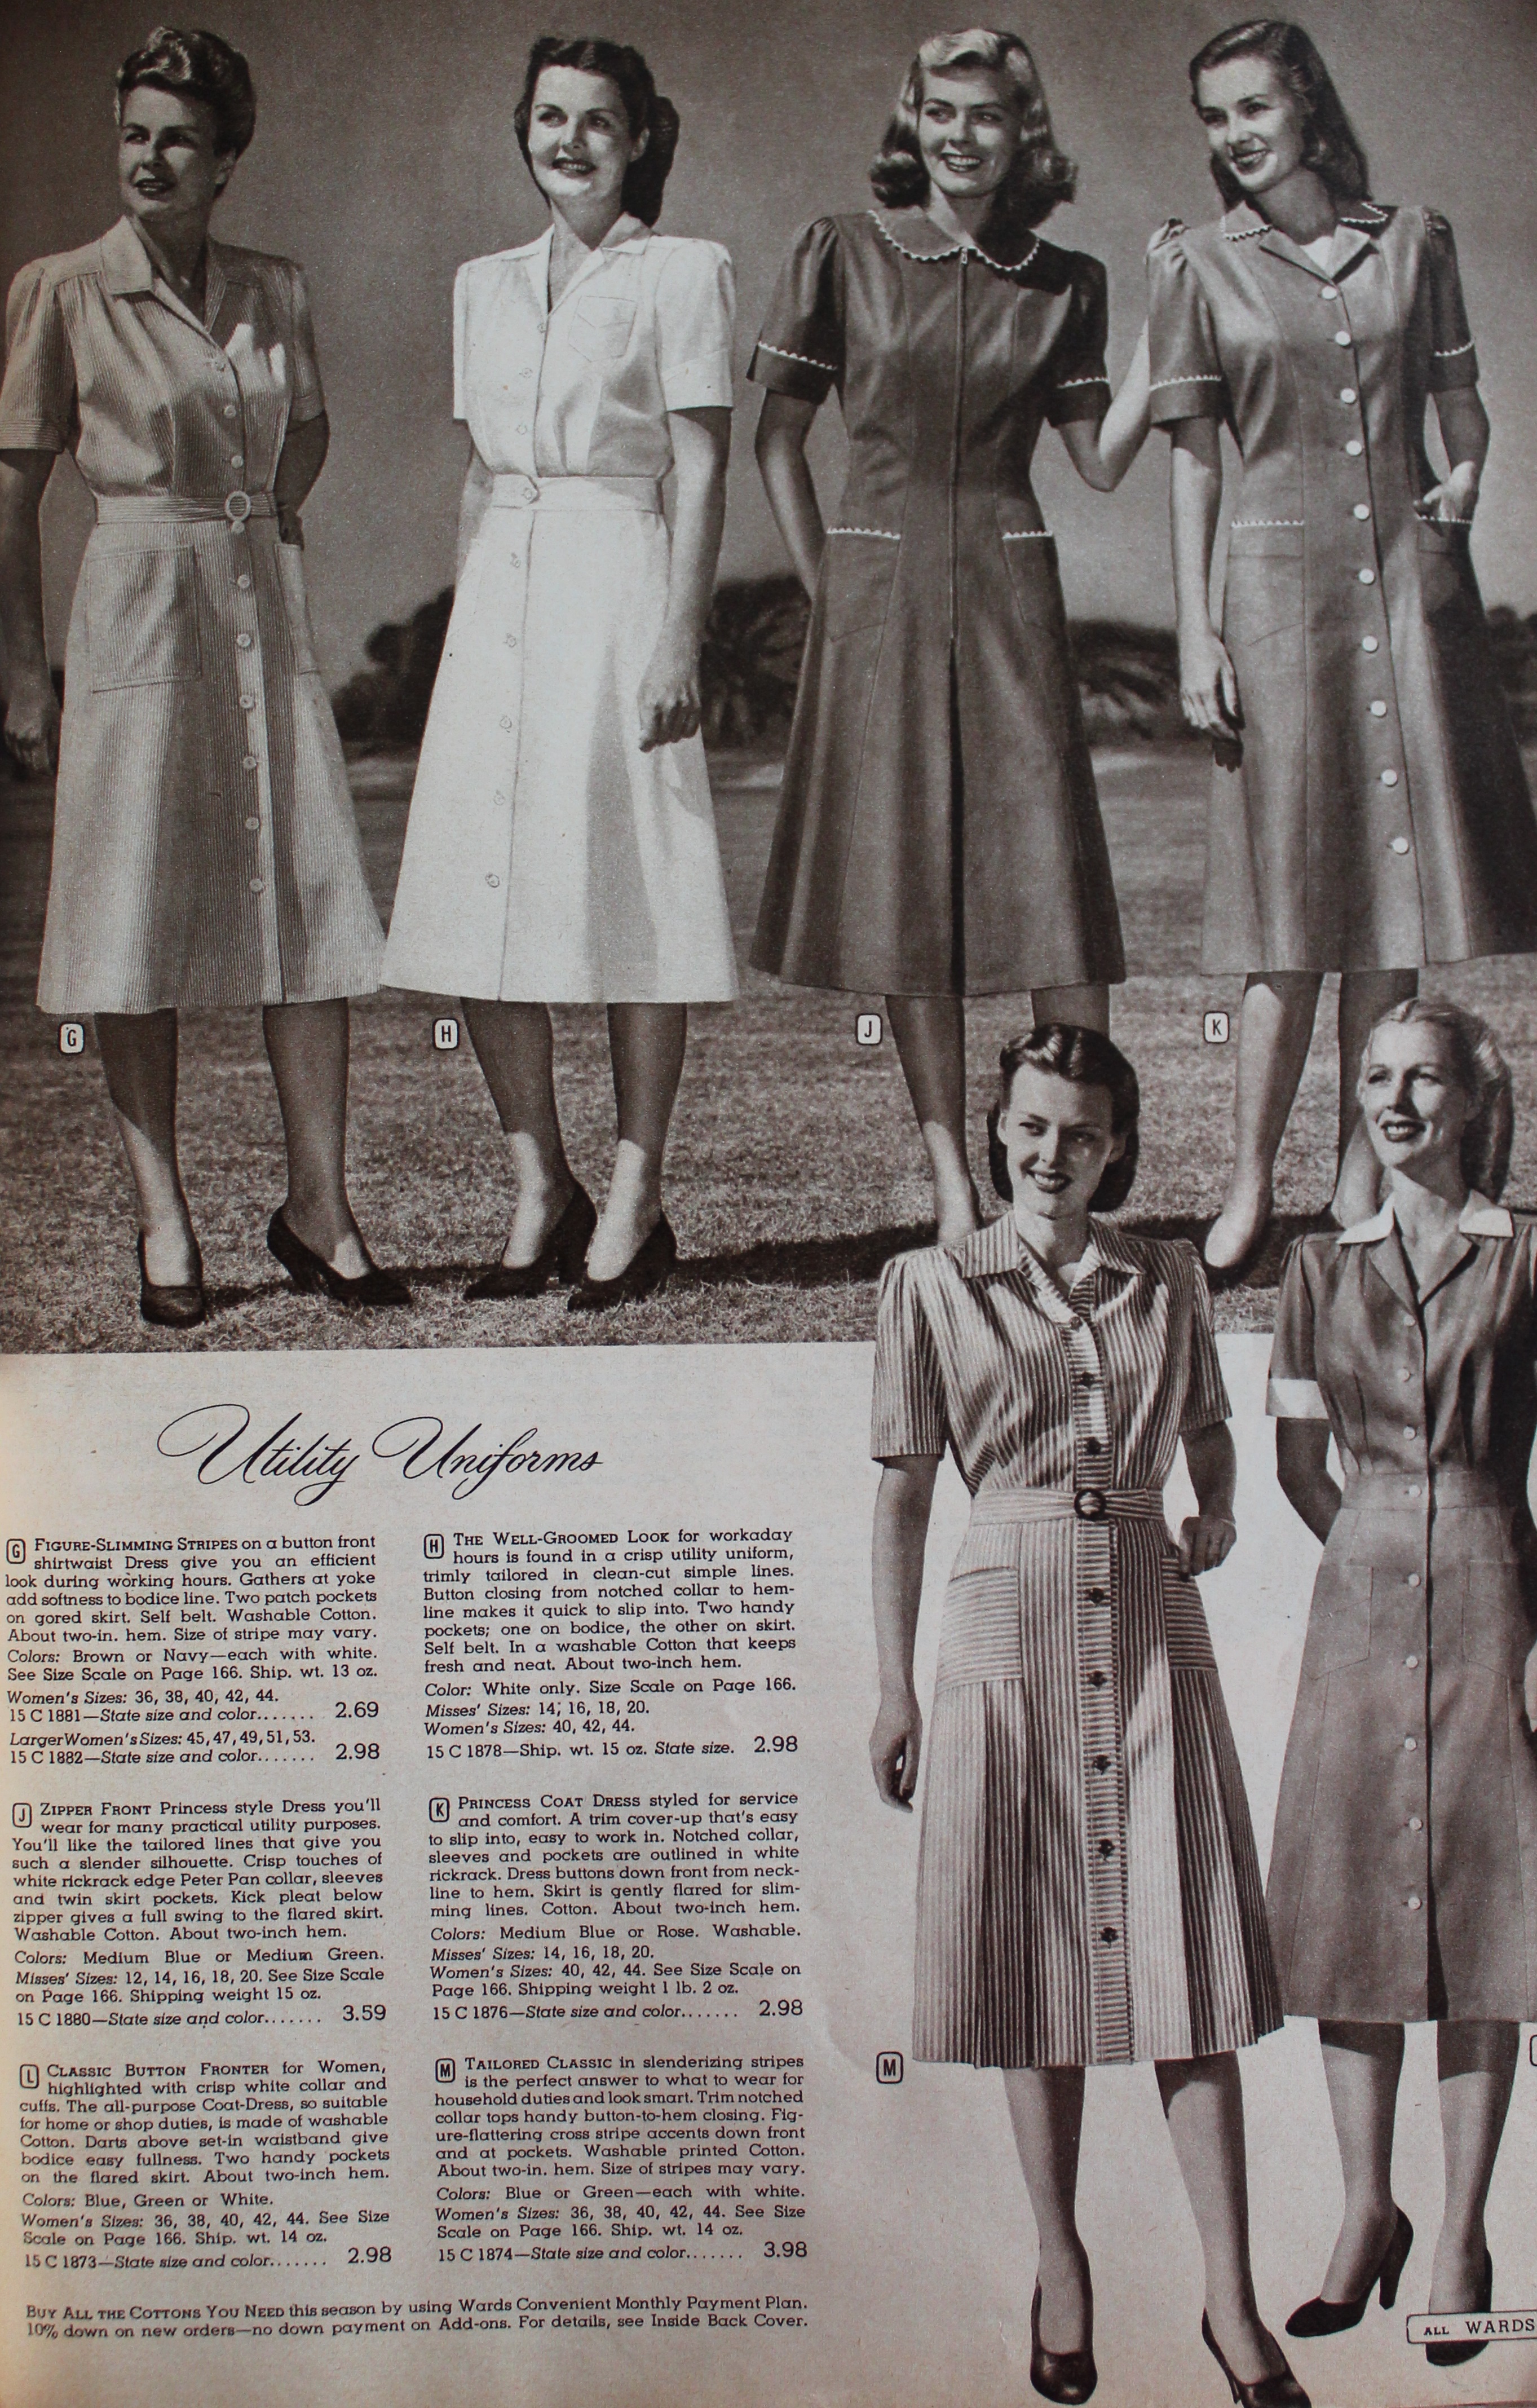 authentic 1940s clothing